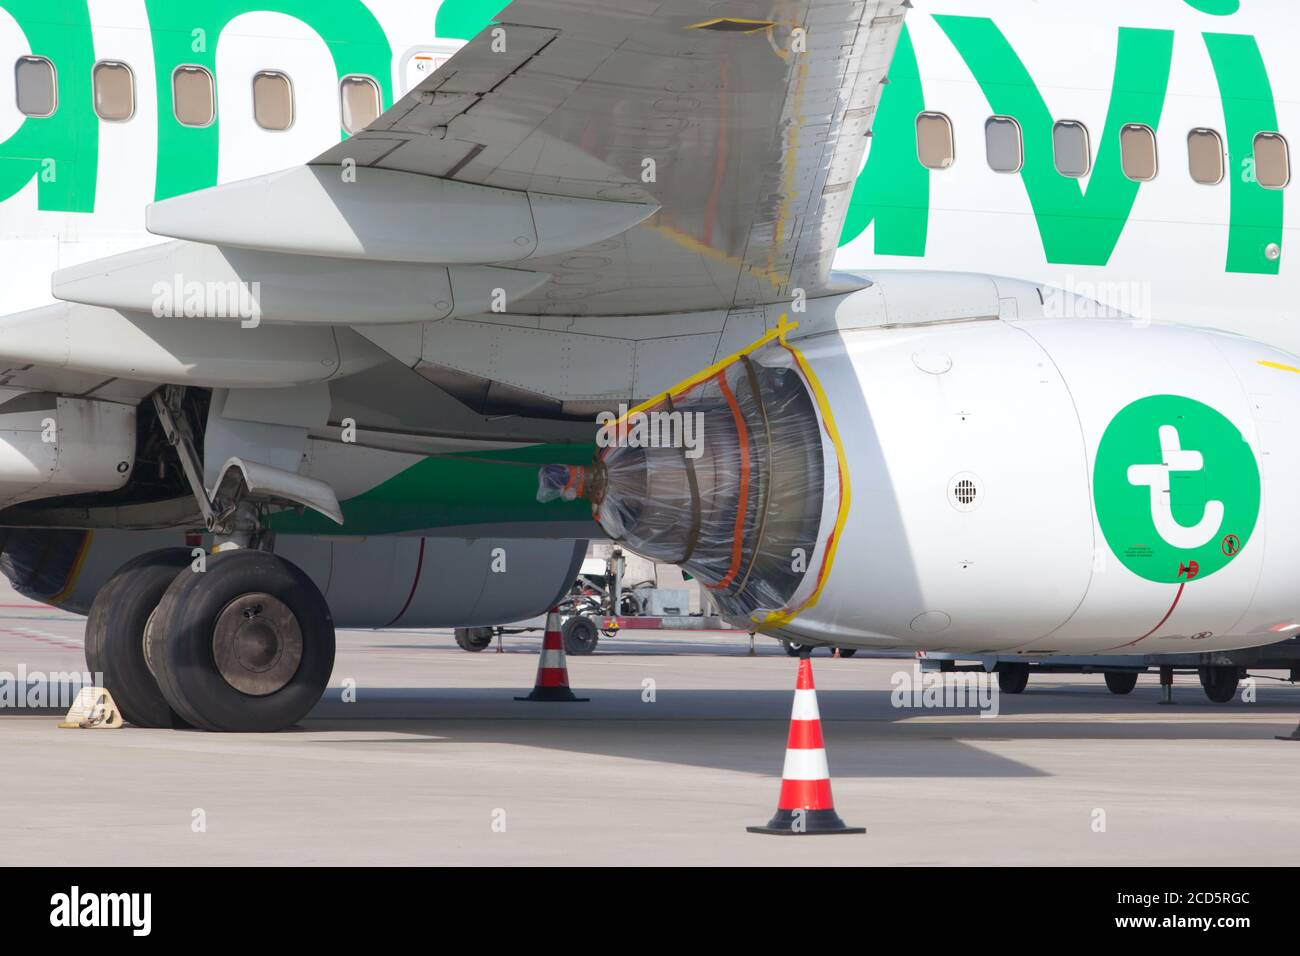 ROTTERDAM - A transavia airplane stands idle at the runway with a wrapped up motor due to the corona travel ban Stock Photo